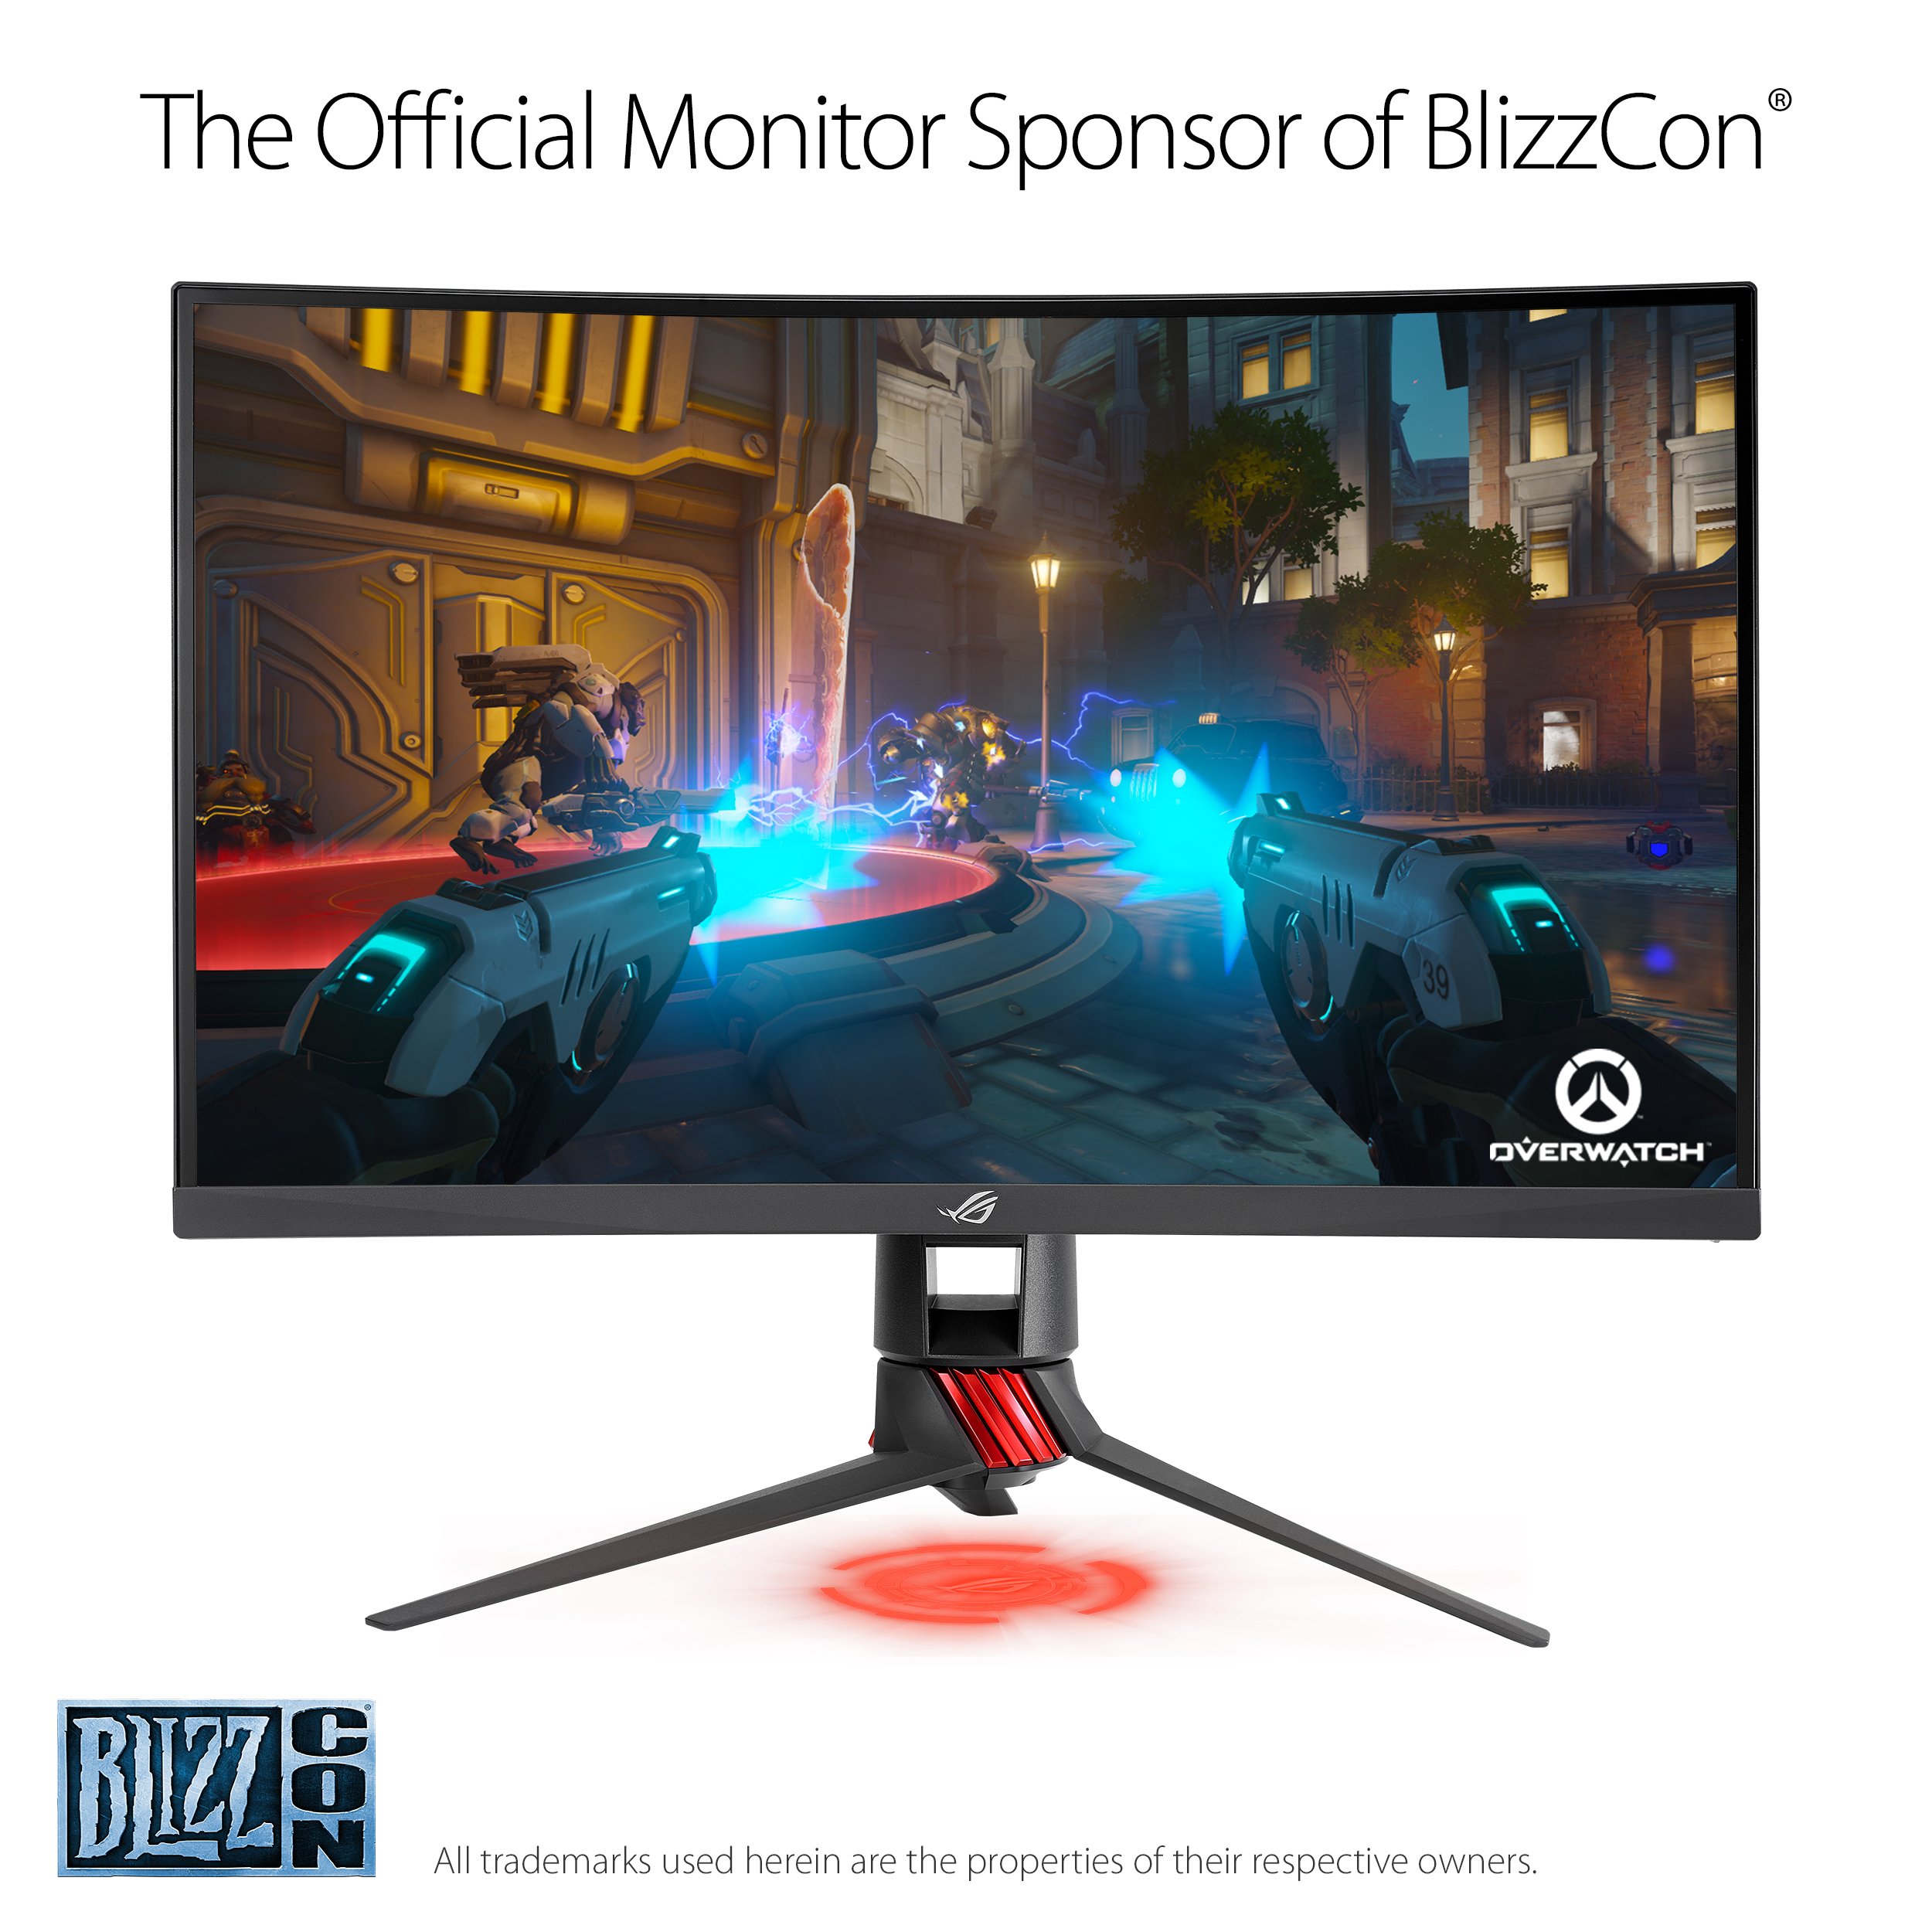 Asus ROG Strix 27” Curved Gaming Monitor Full HD 1080p 144Hz DP HDMI DVI Fully Adjustable Function w/ Industry leading 3 years warranty (XG27VQ)